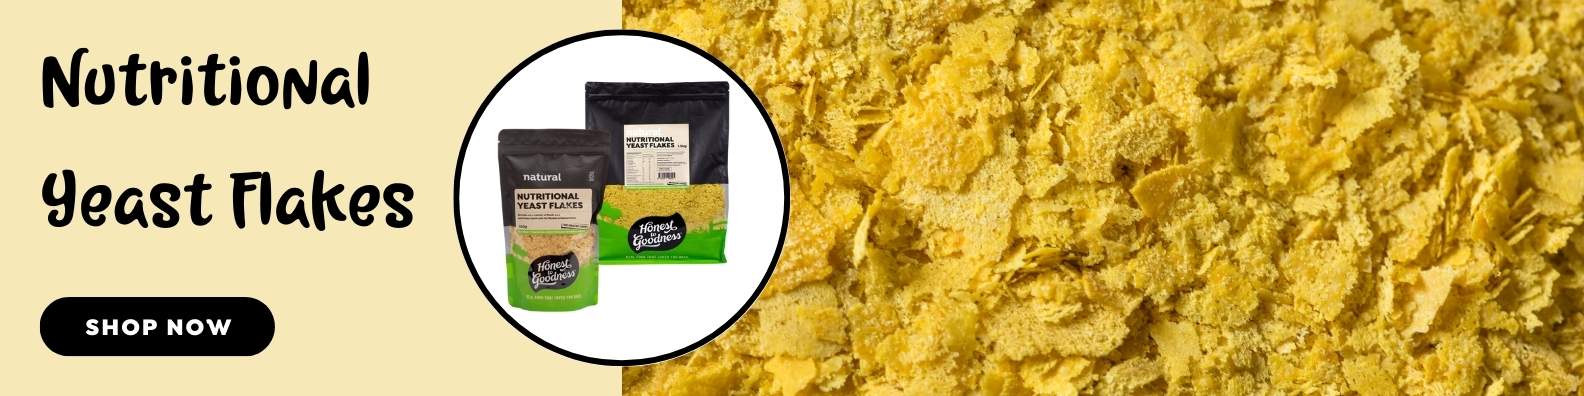 Elevate Your Cooking with Honest to Goodness Nutritional Yeast - Shop Now